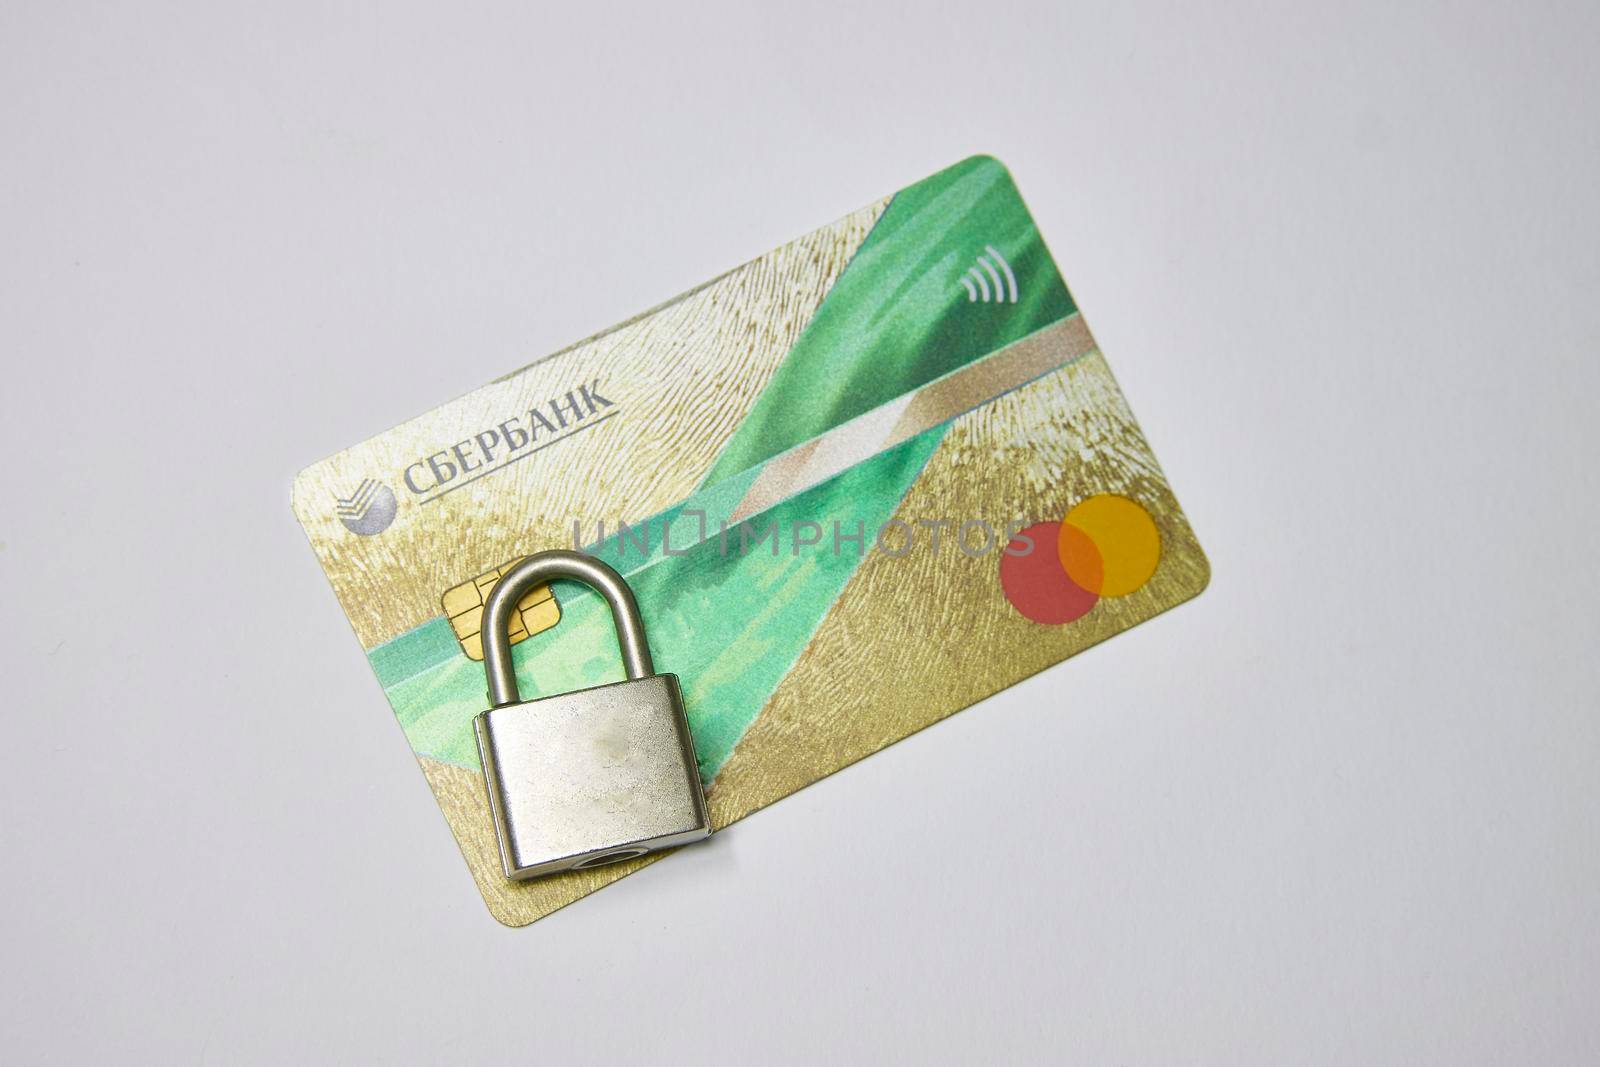 Russia, Syzran - FEBRUARY 27, 2022: sanctions against Sberbank. bank card under lock and key by vadiar